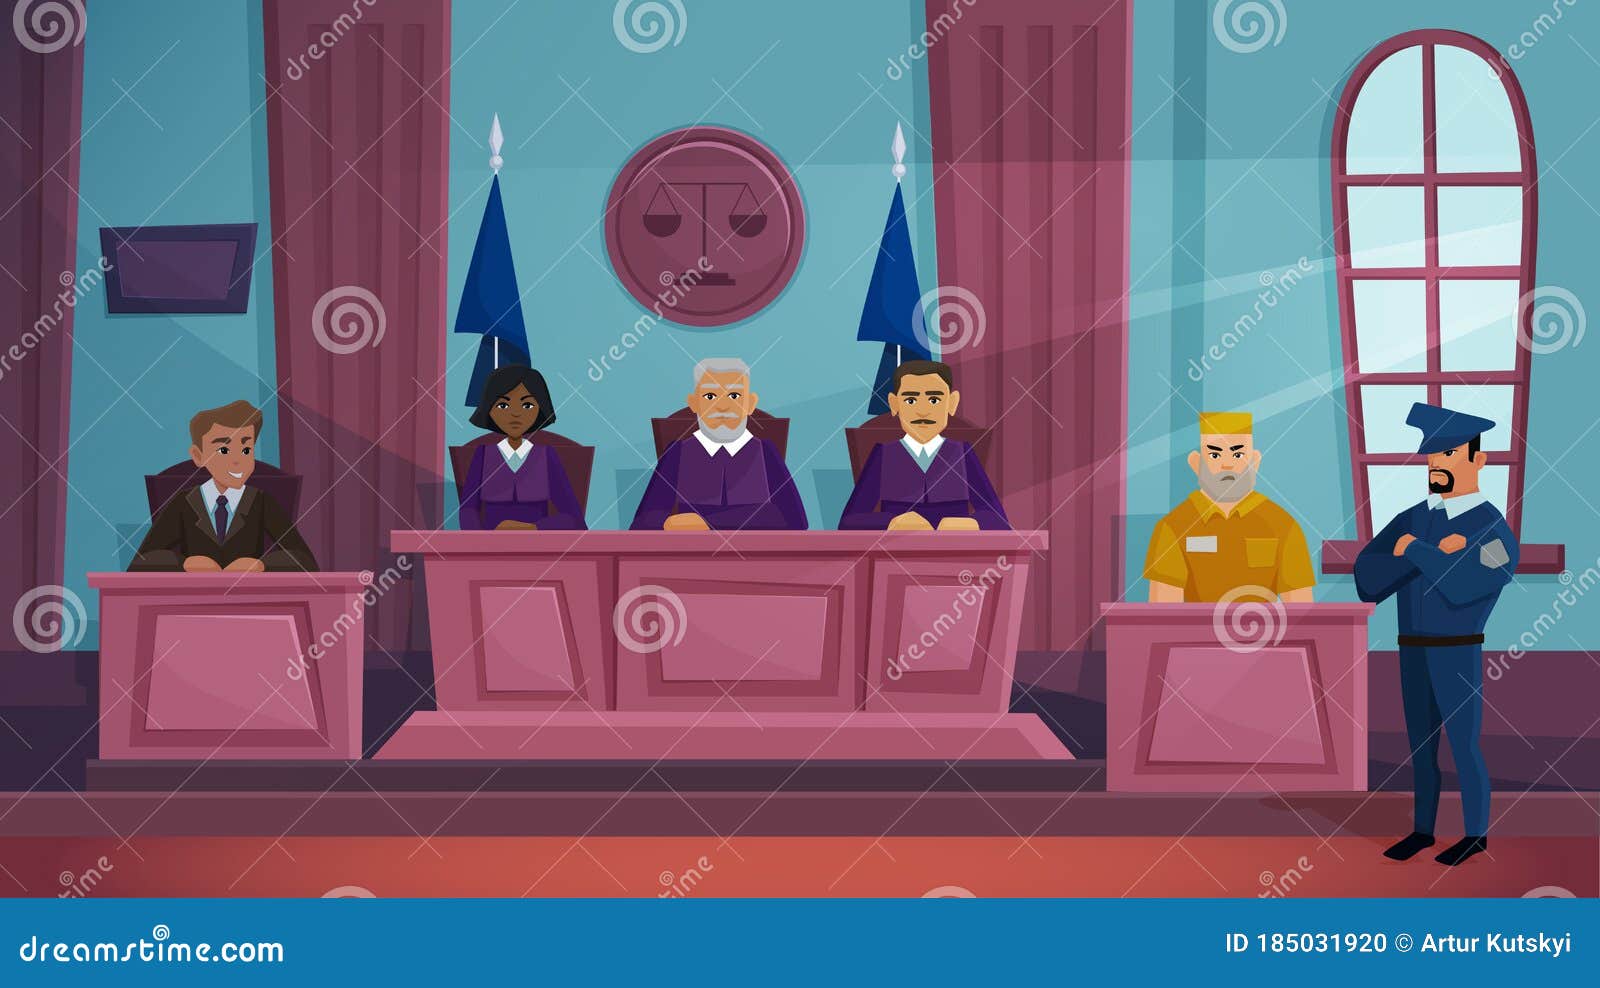 Court of Law Justice Vector Illustration, Cartoon Flat Courtroom Interior  with Judge, Lawyer Prosecutor and Criminal Stock Vector - Illustration of  people, characters: 185031920